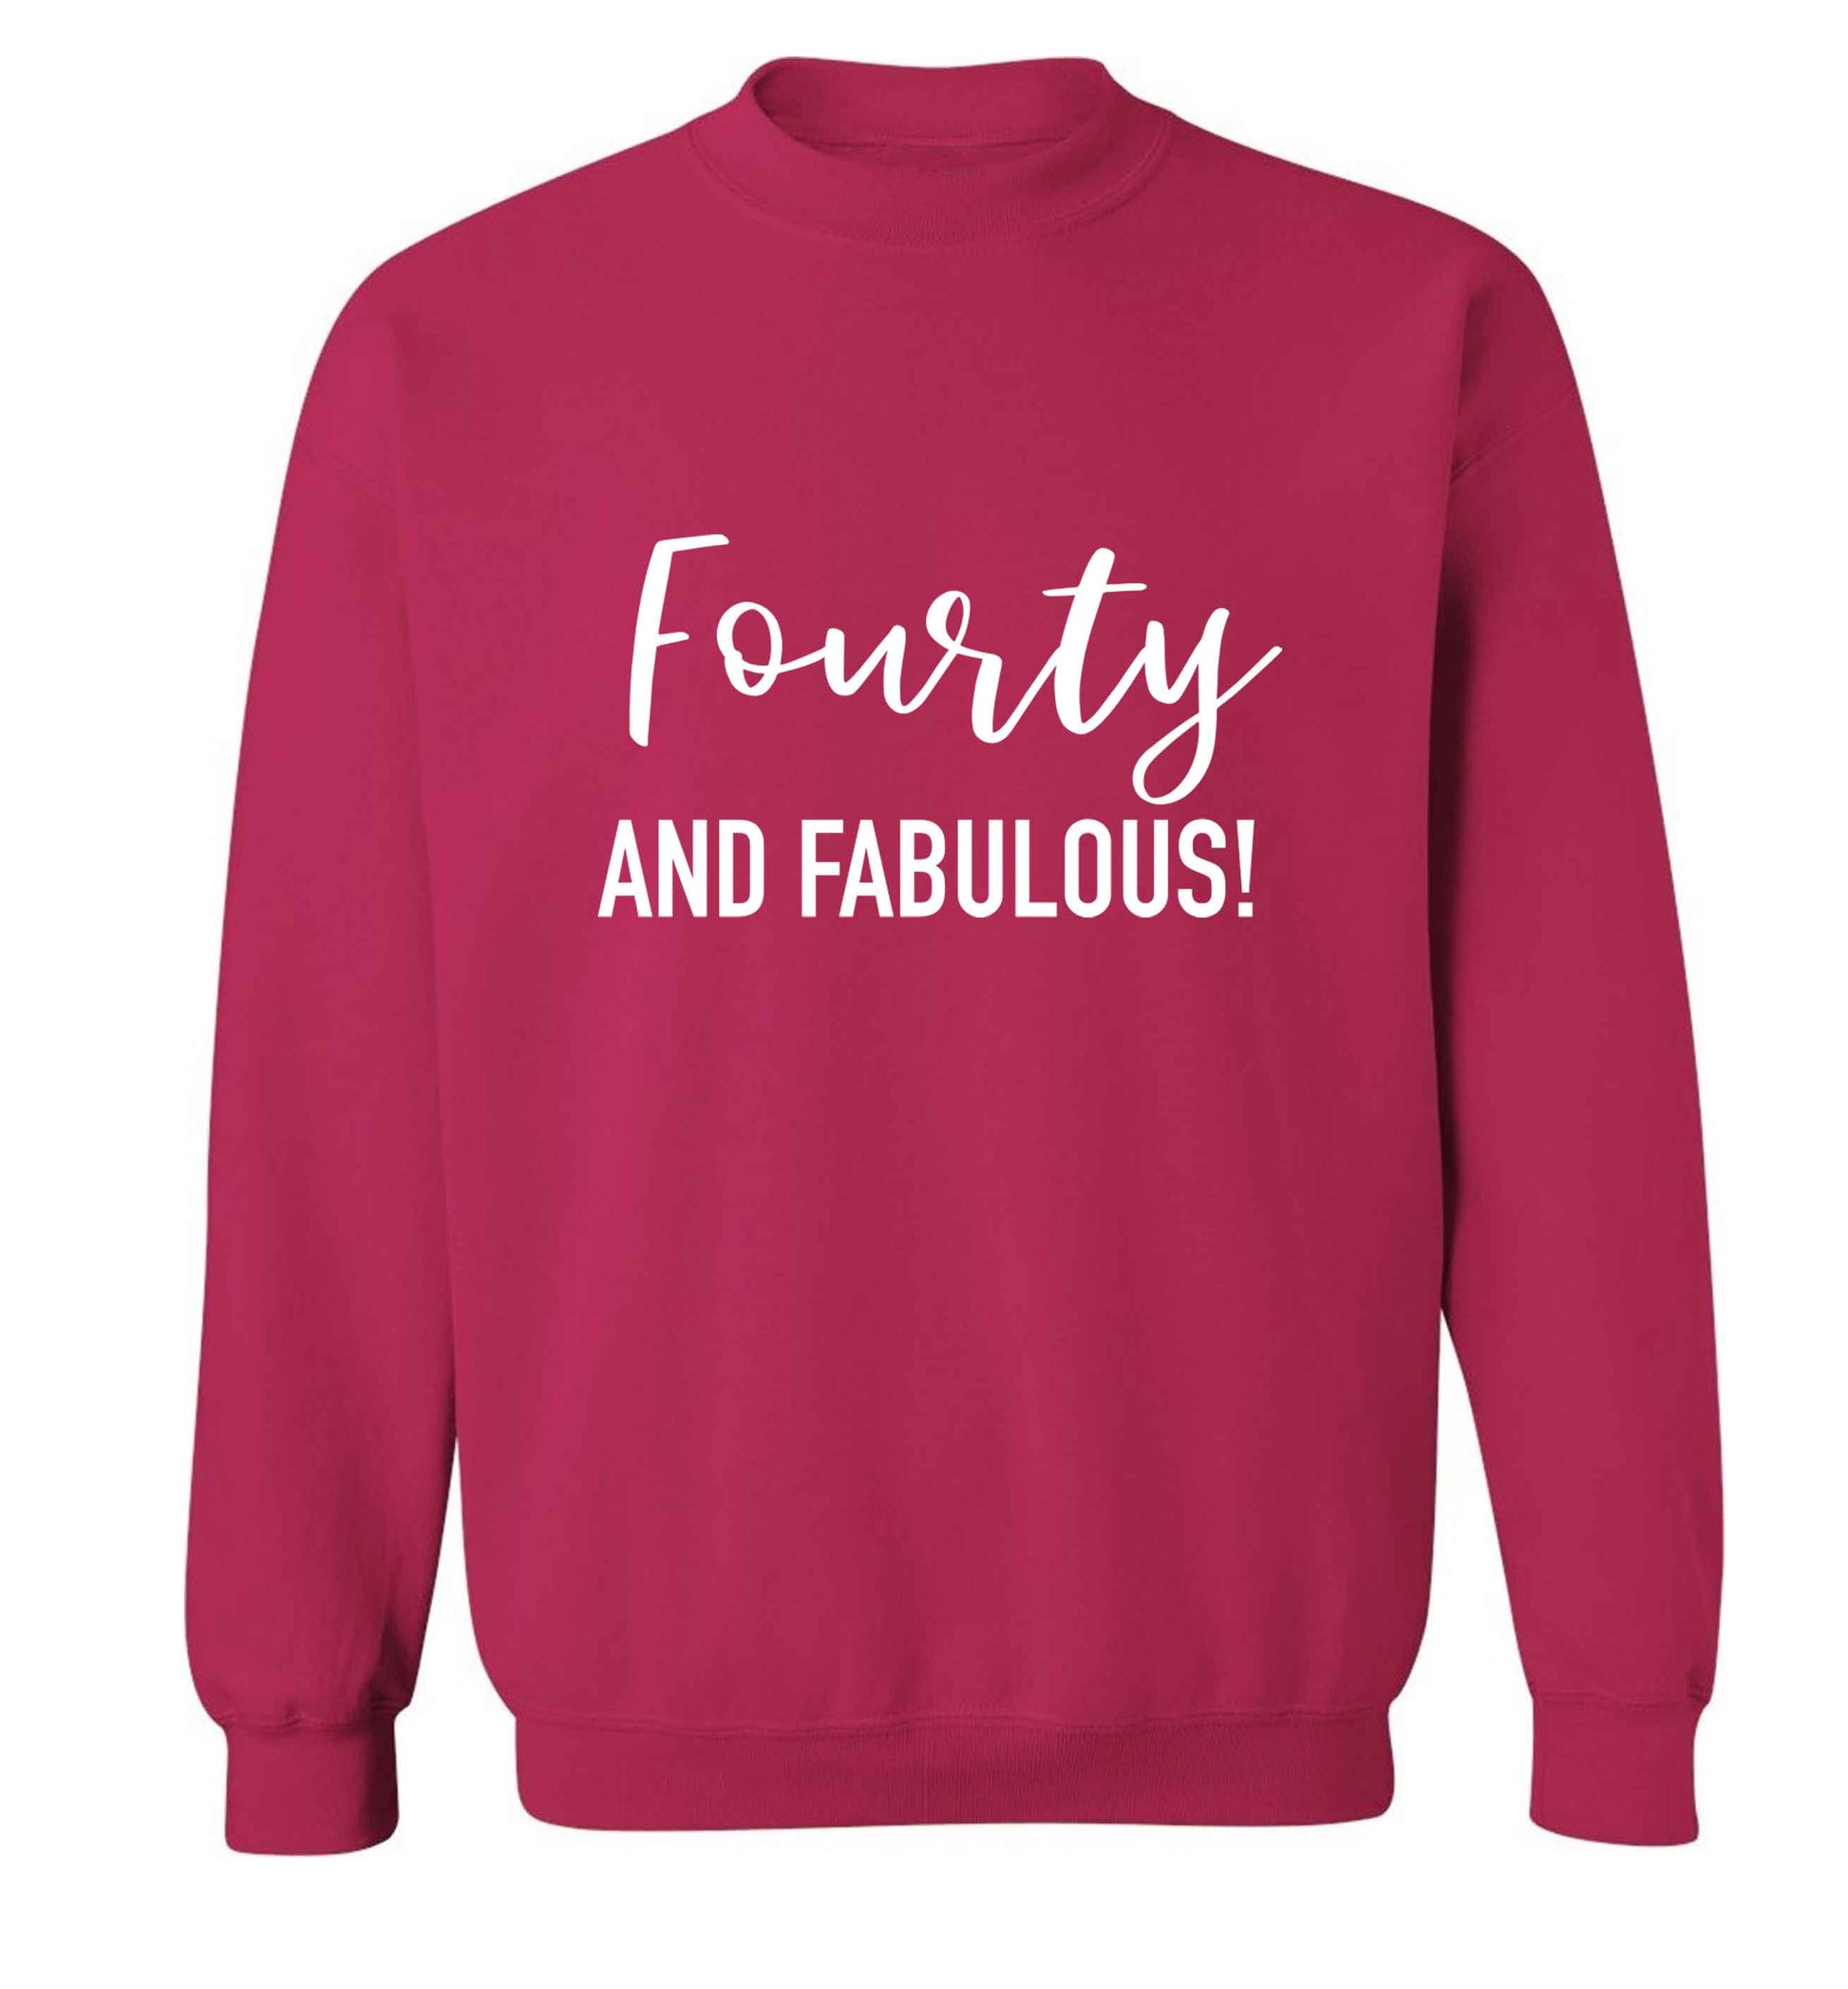 Fourty and fabulous adult's unisex pink sweater 2XL